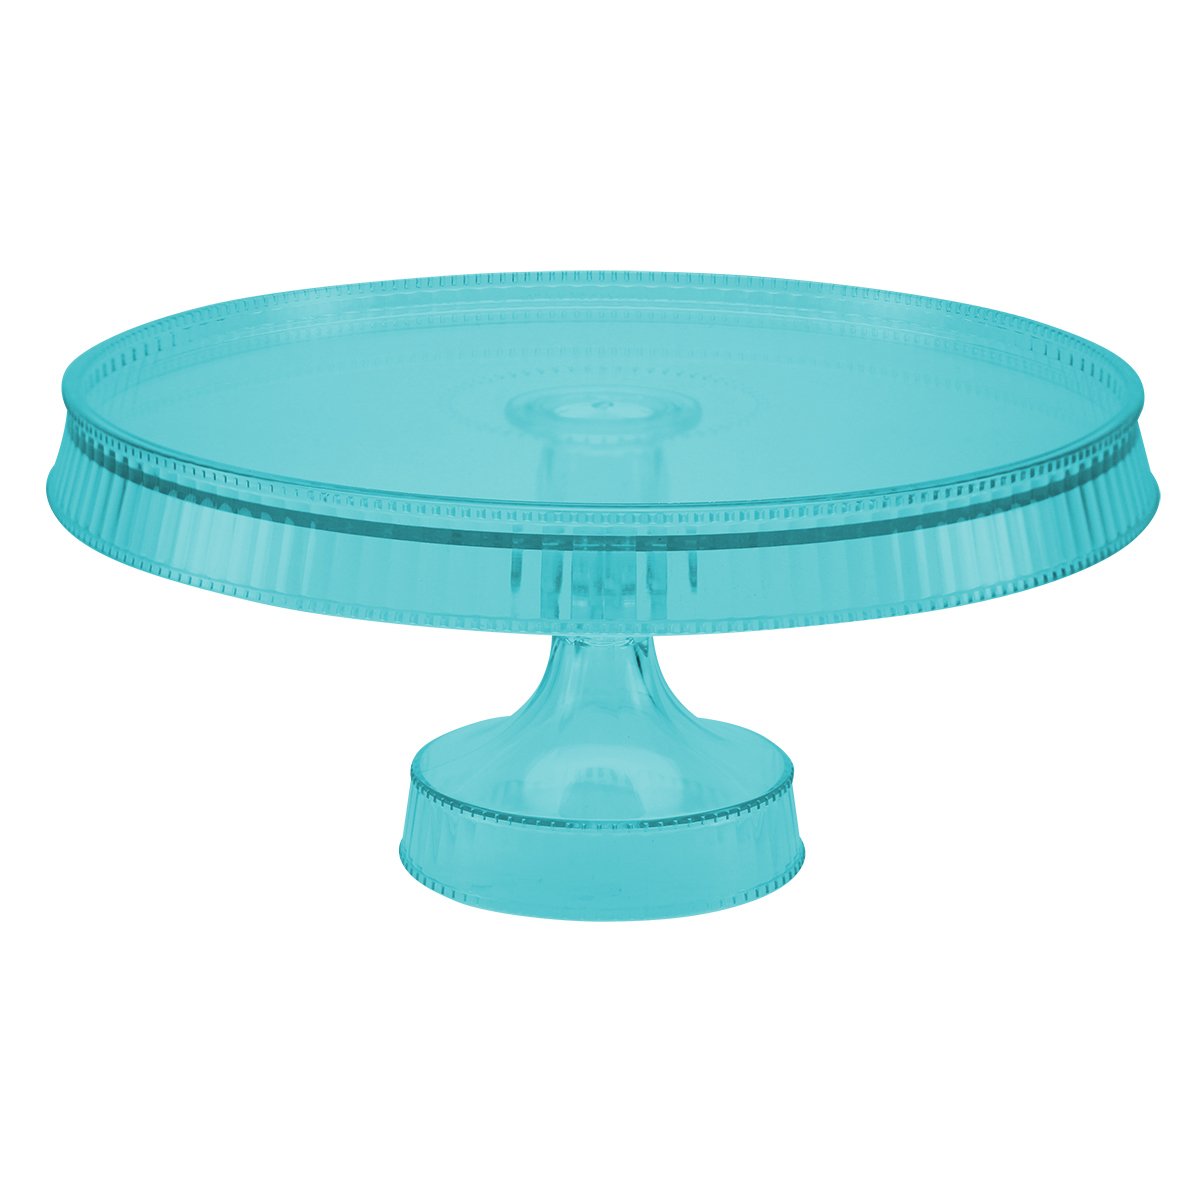 10.5inch Cake Stand / Blue